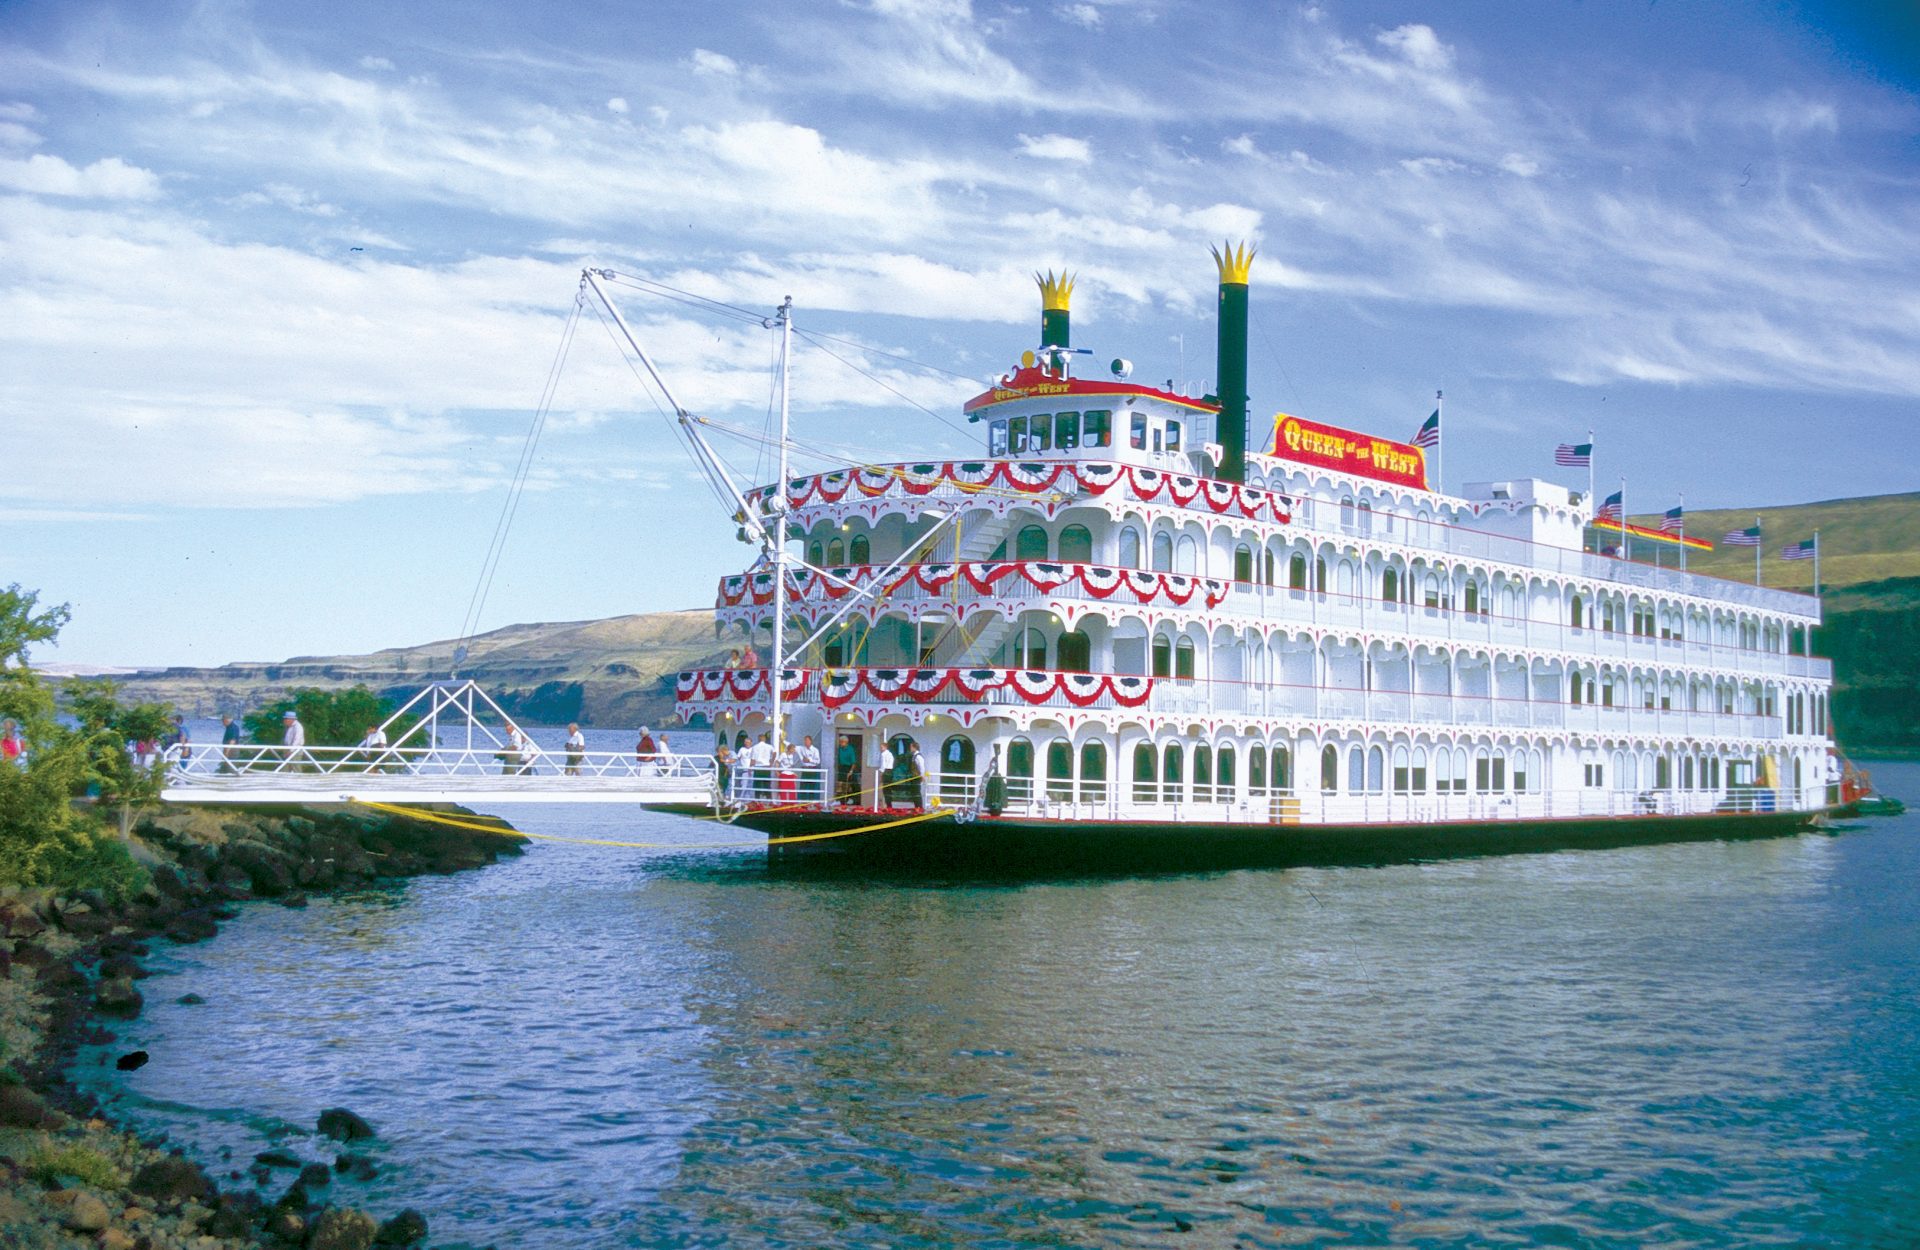 American West USA River Cruises